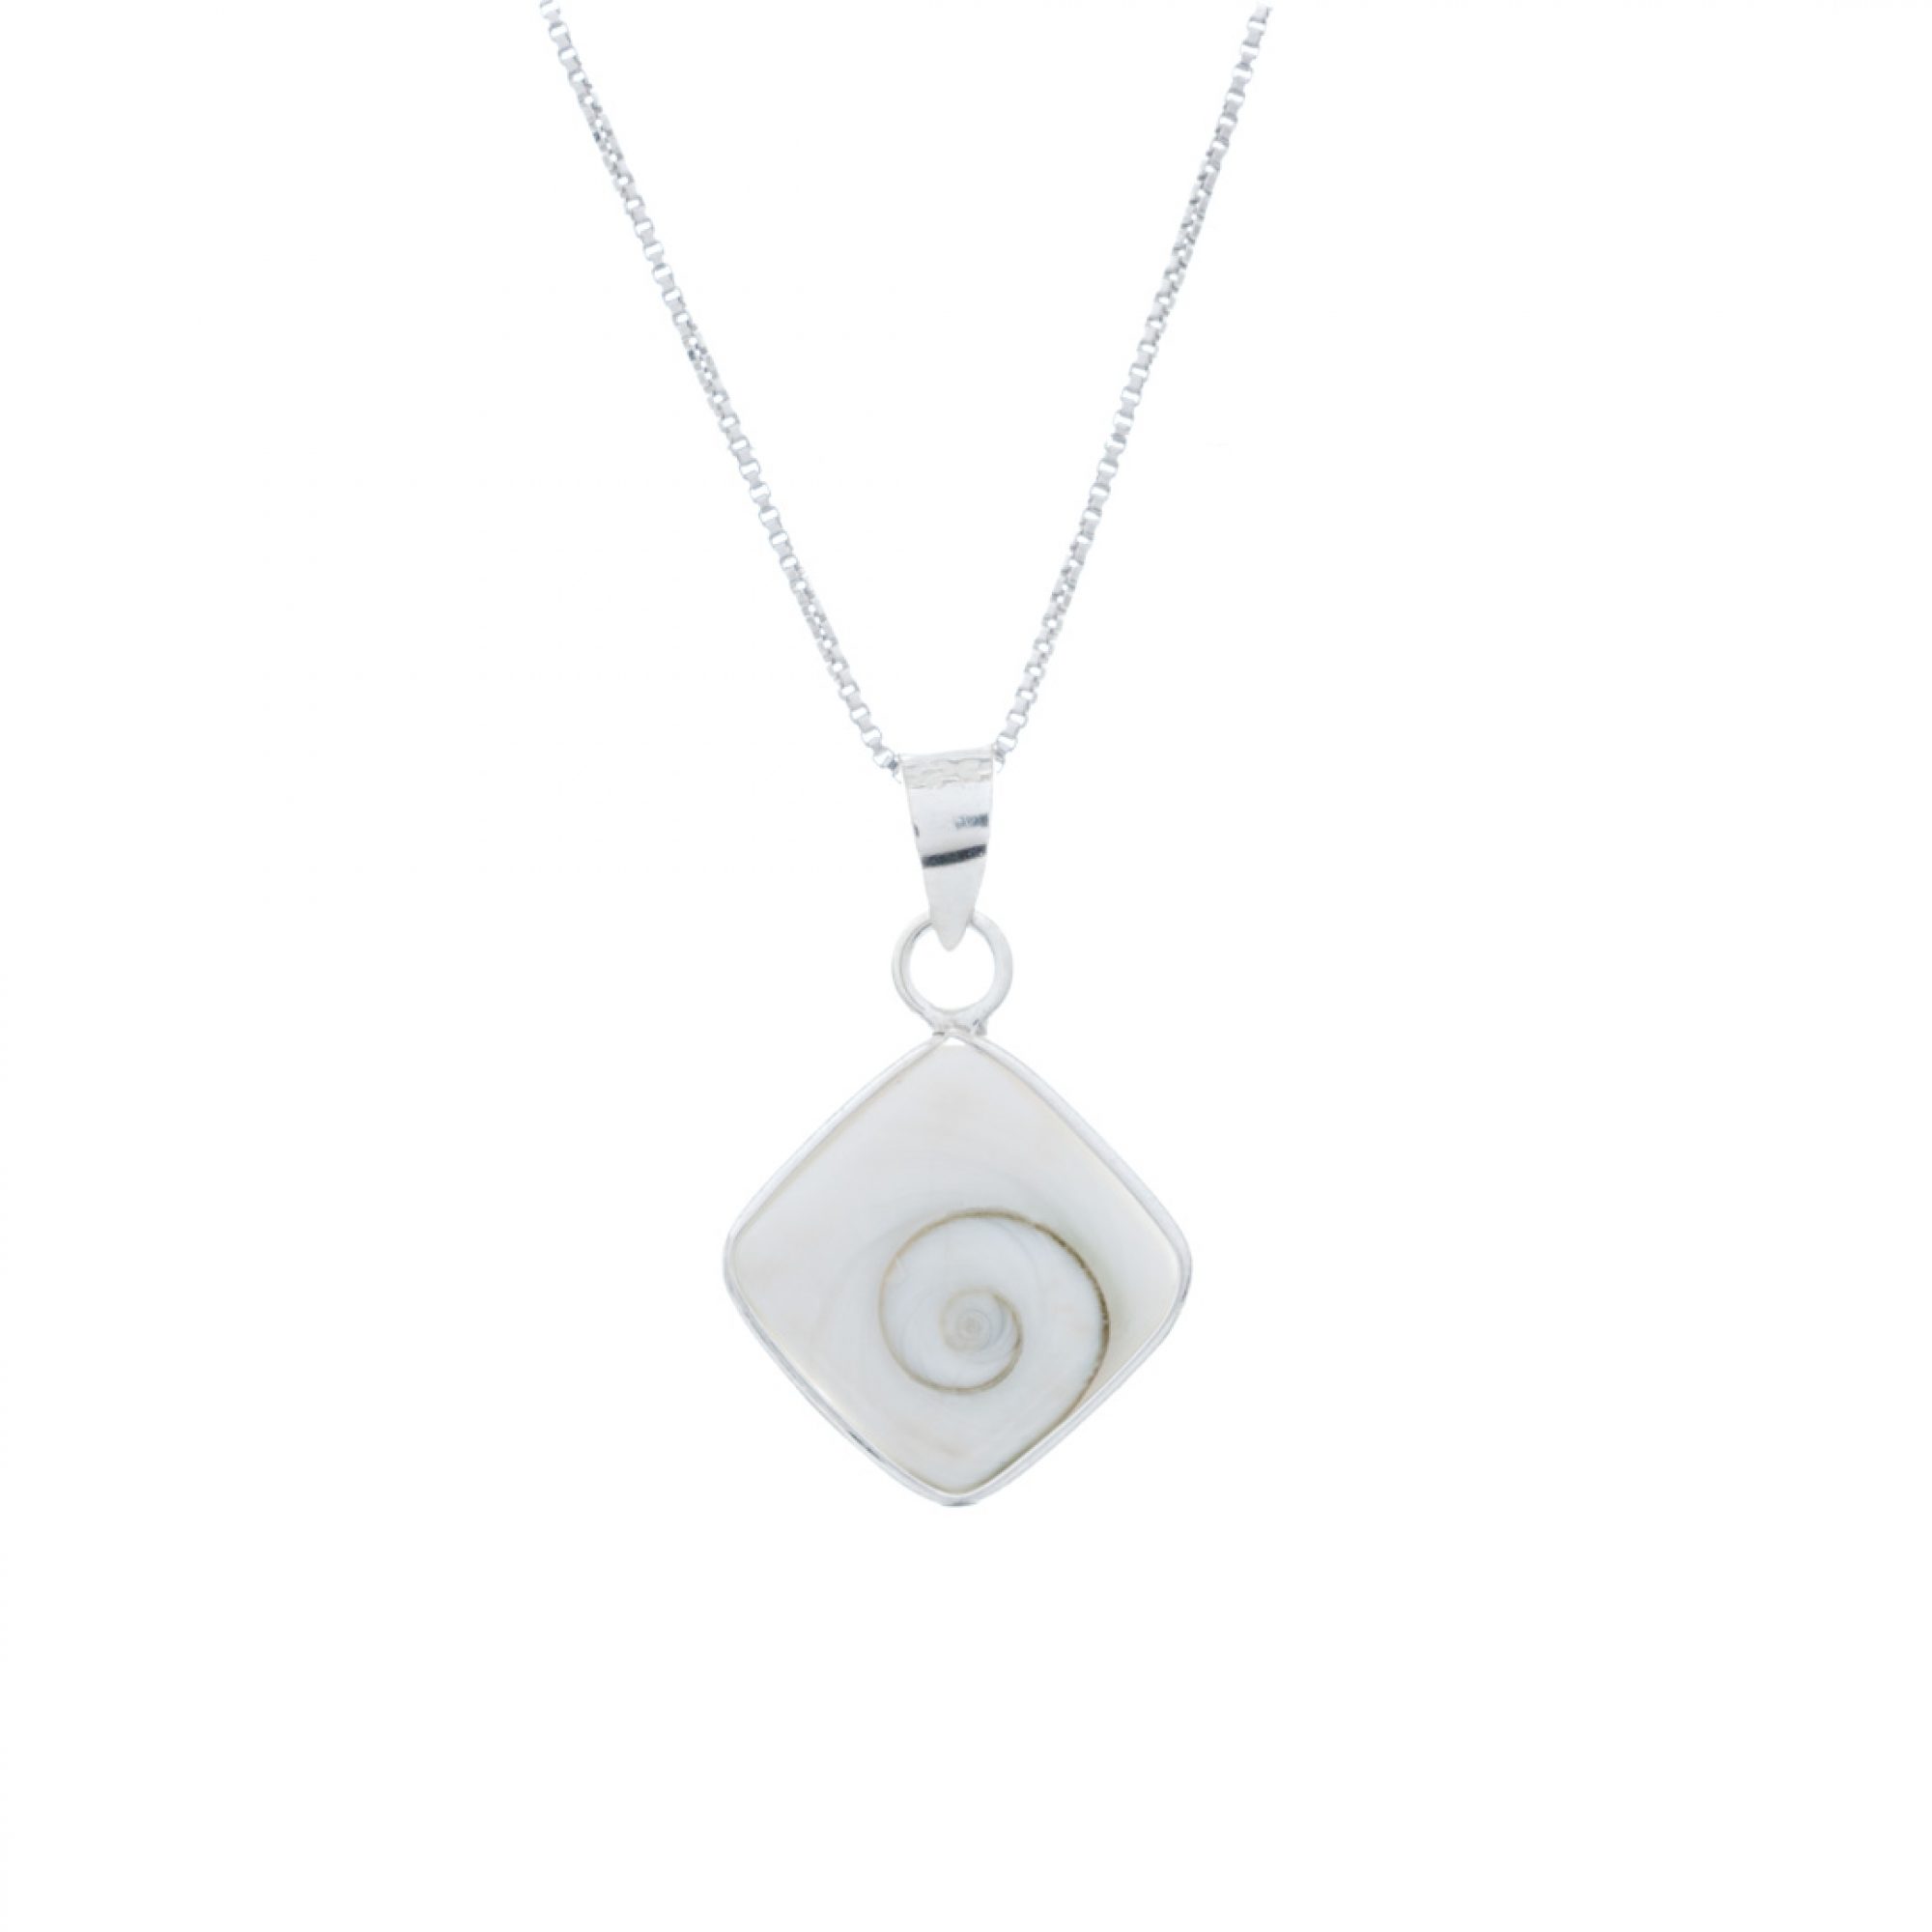 Eye of the sea necklace